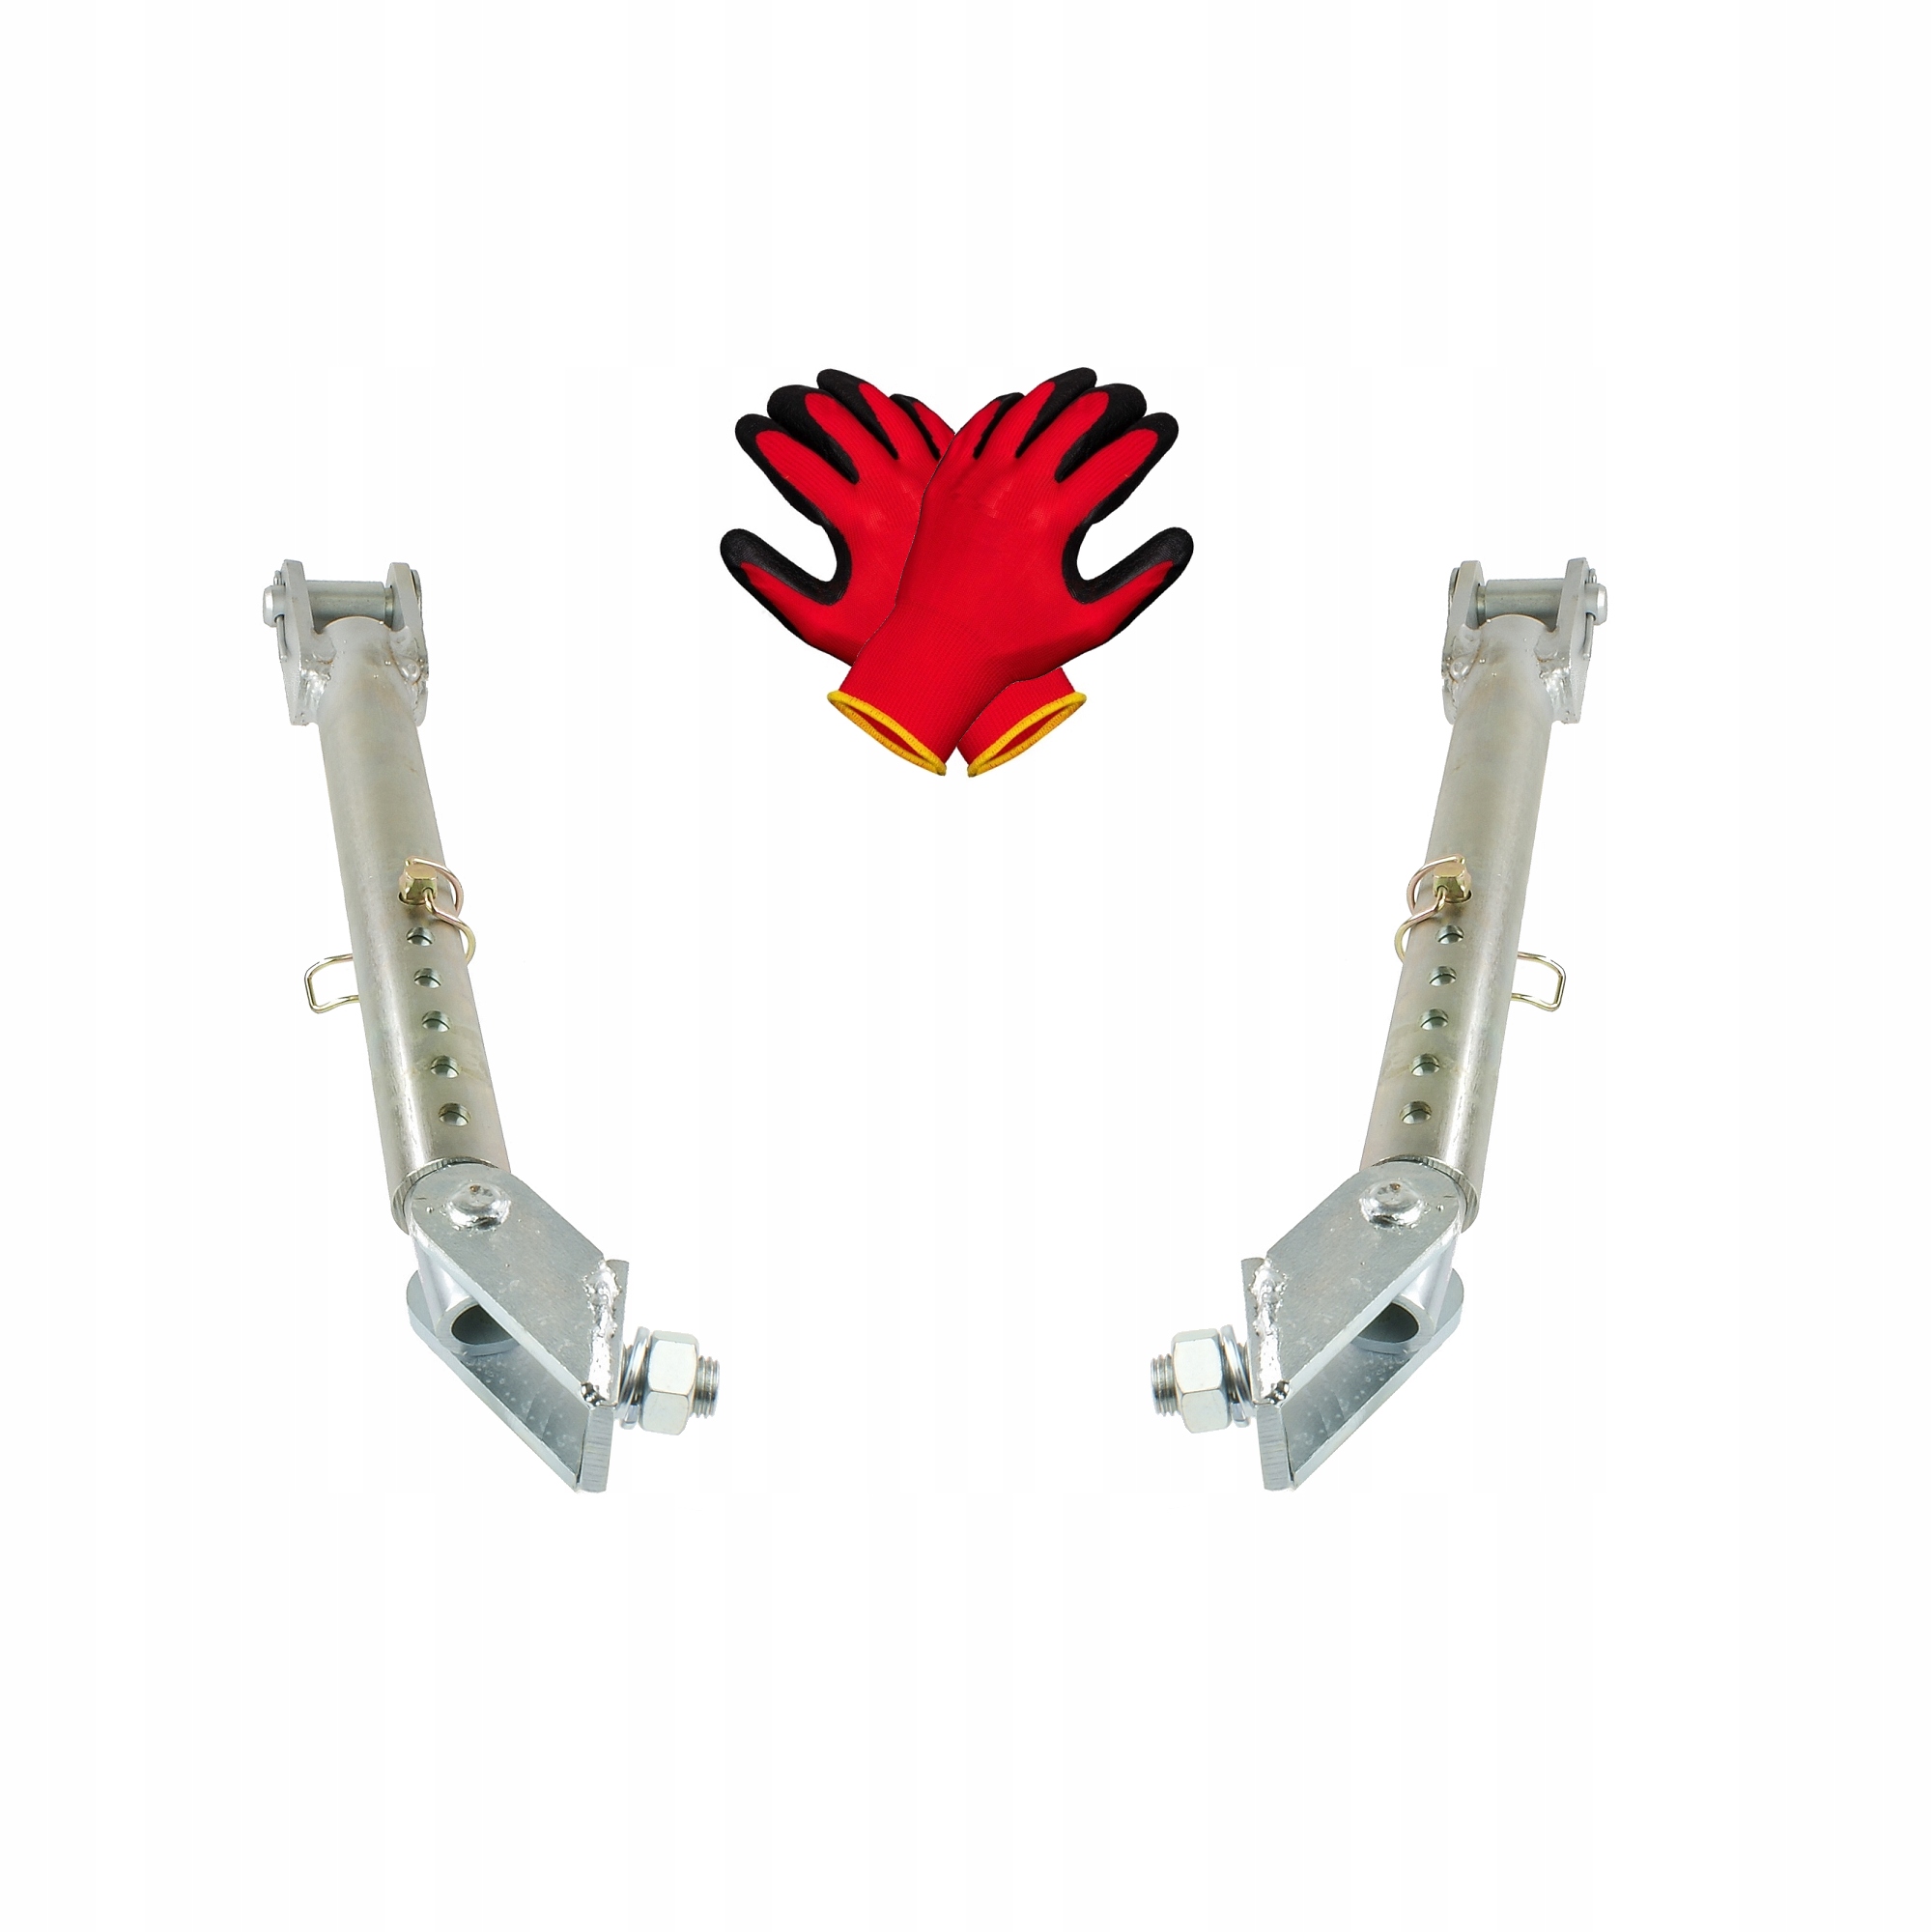 2.00.00.202 - TWO SIDE STABILIZERS C-360 3P ZETOR